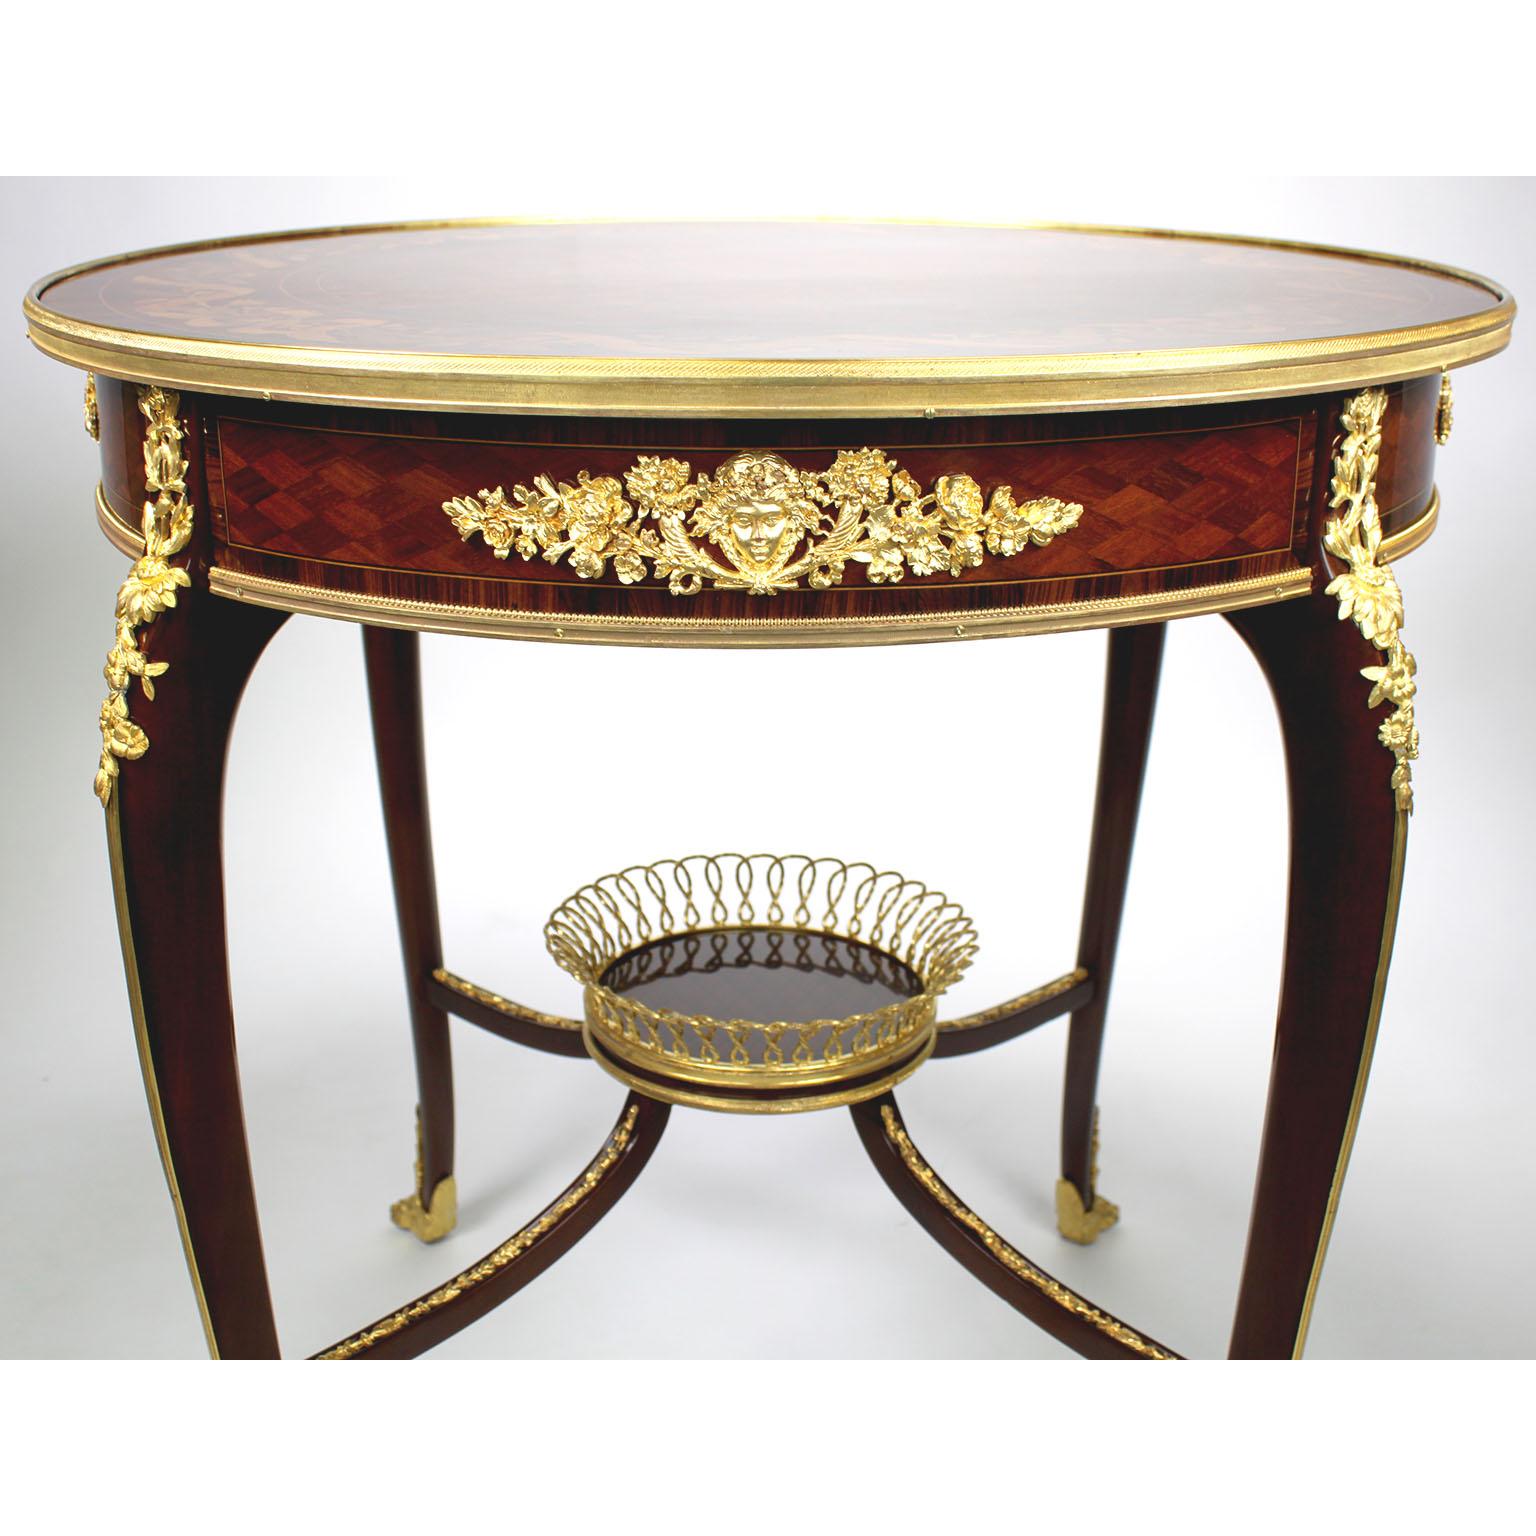 Early 20th Century French 19th-20th Century Circular Marquetry & Ormolu Table, Attr. François Linke For Sale